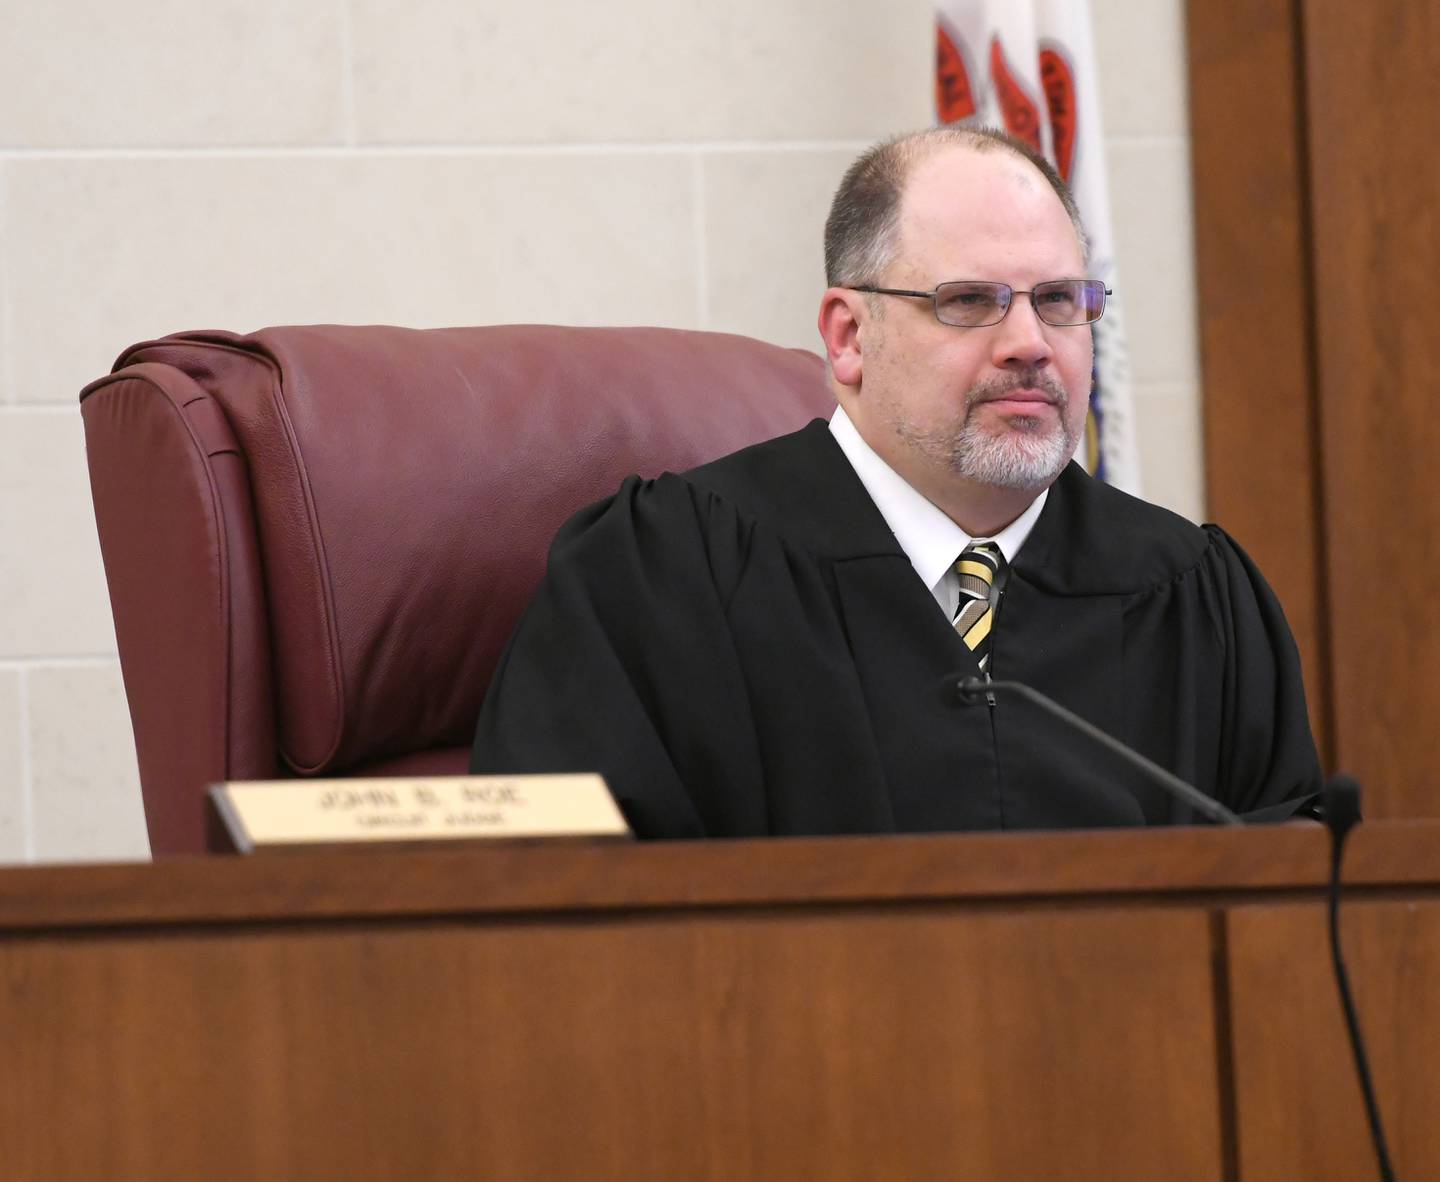 Ogle County Judge John B. Roe presided over the hearing for Matthew Plote in Ogle County on Thursday, Jan. 19. The case was continued to March 1.